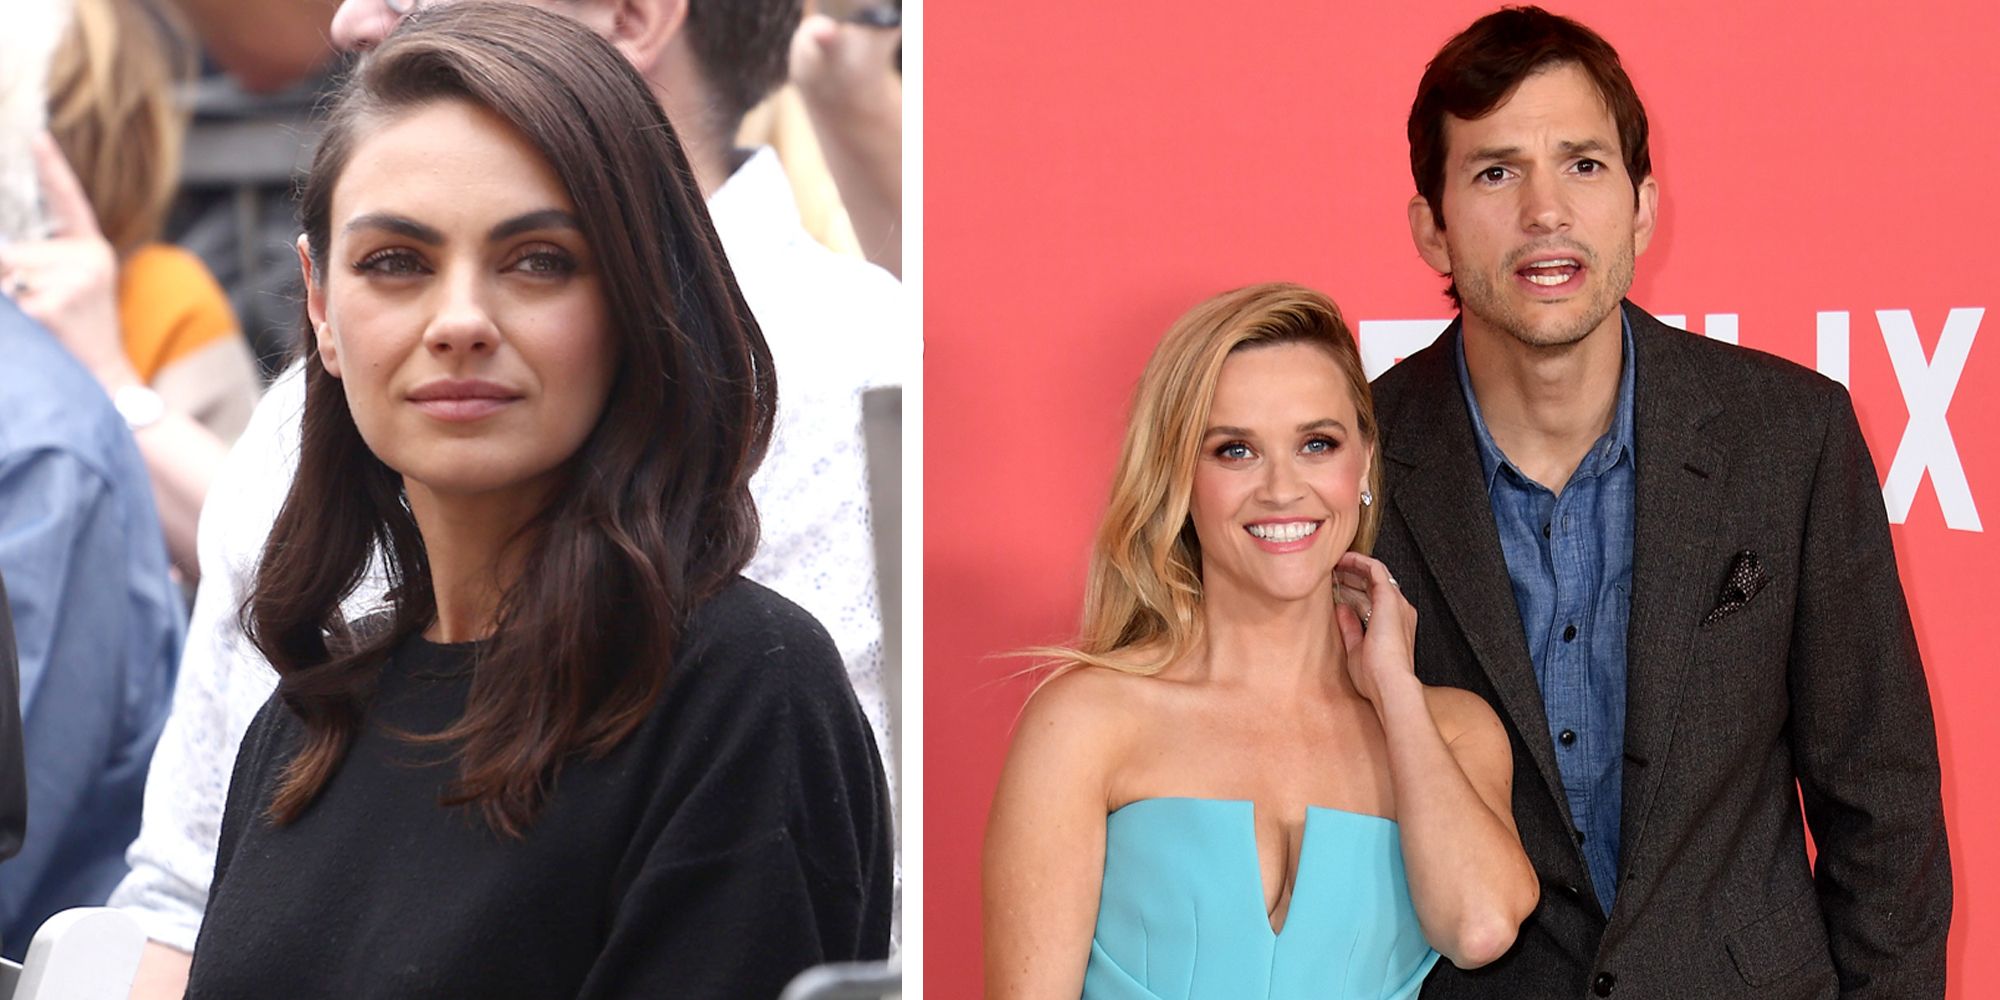 Naked Reese Witherspoon Handjob - Mila Kunis Reacts to Ashton Kutcher and Reese Witherspoon's Awkward  Red-Carpet Photos